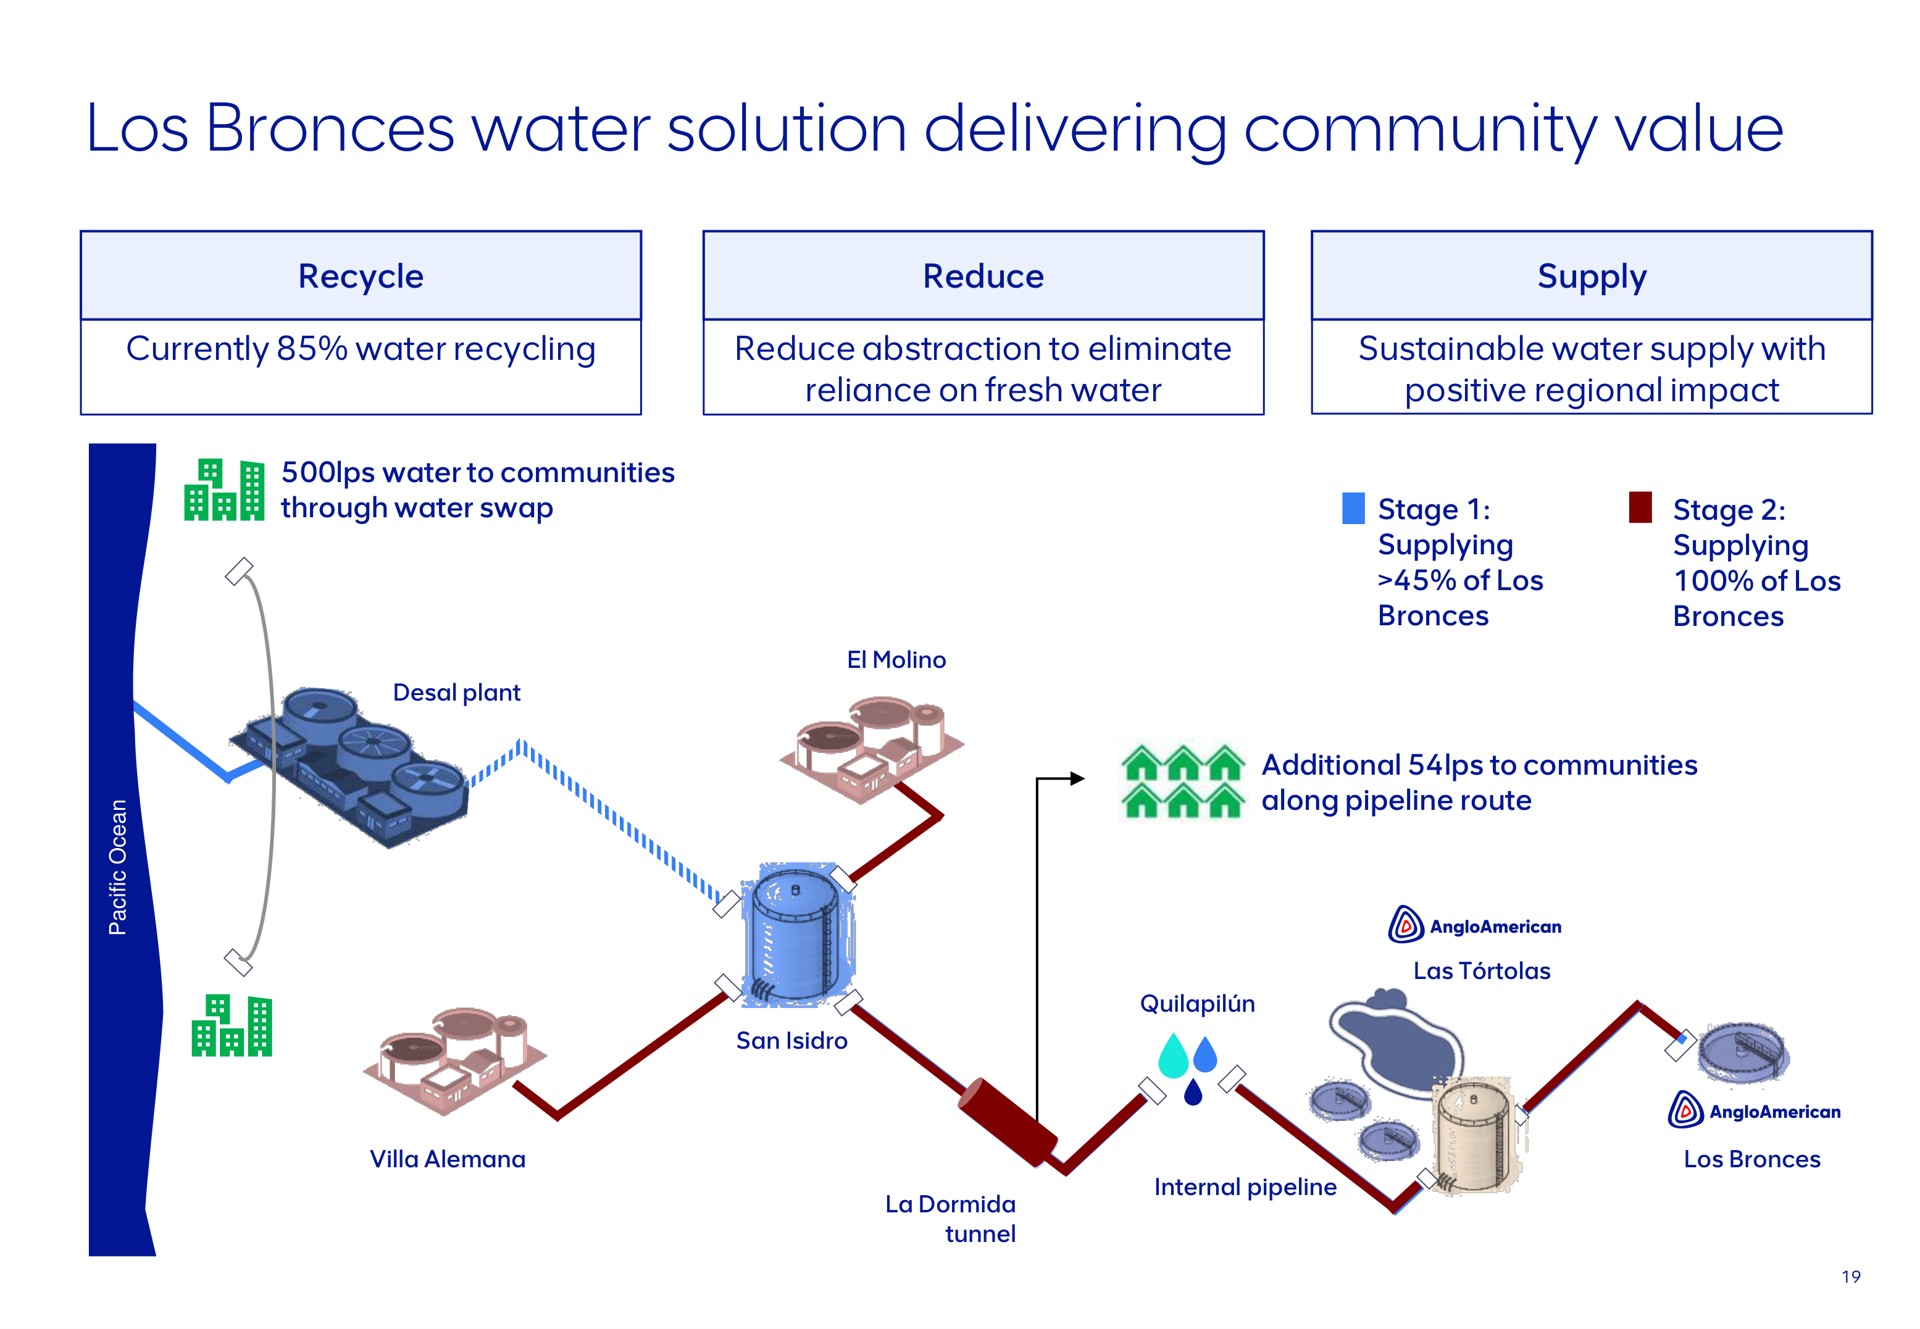 water solution delivering community value | AngloAmerican